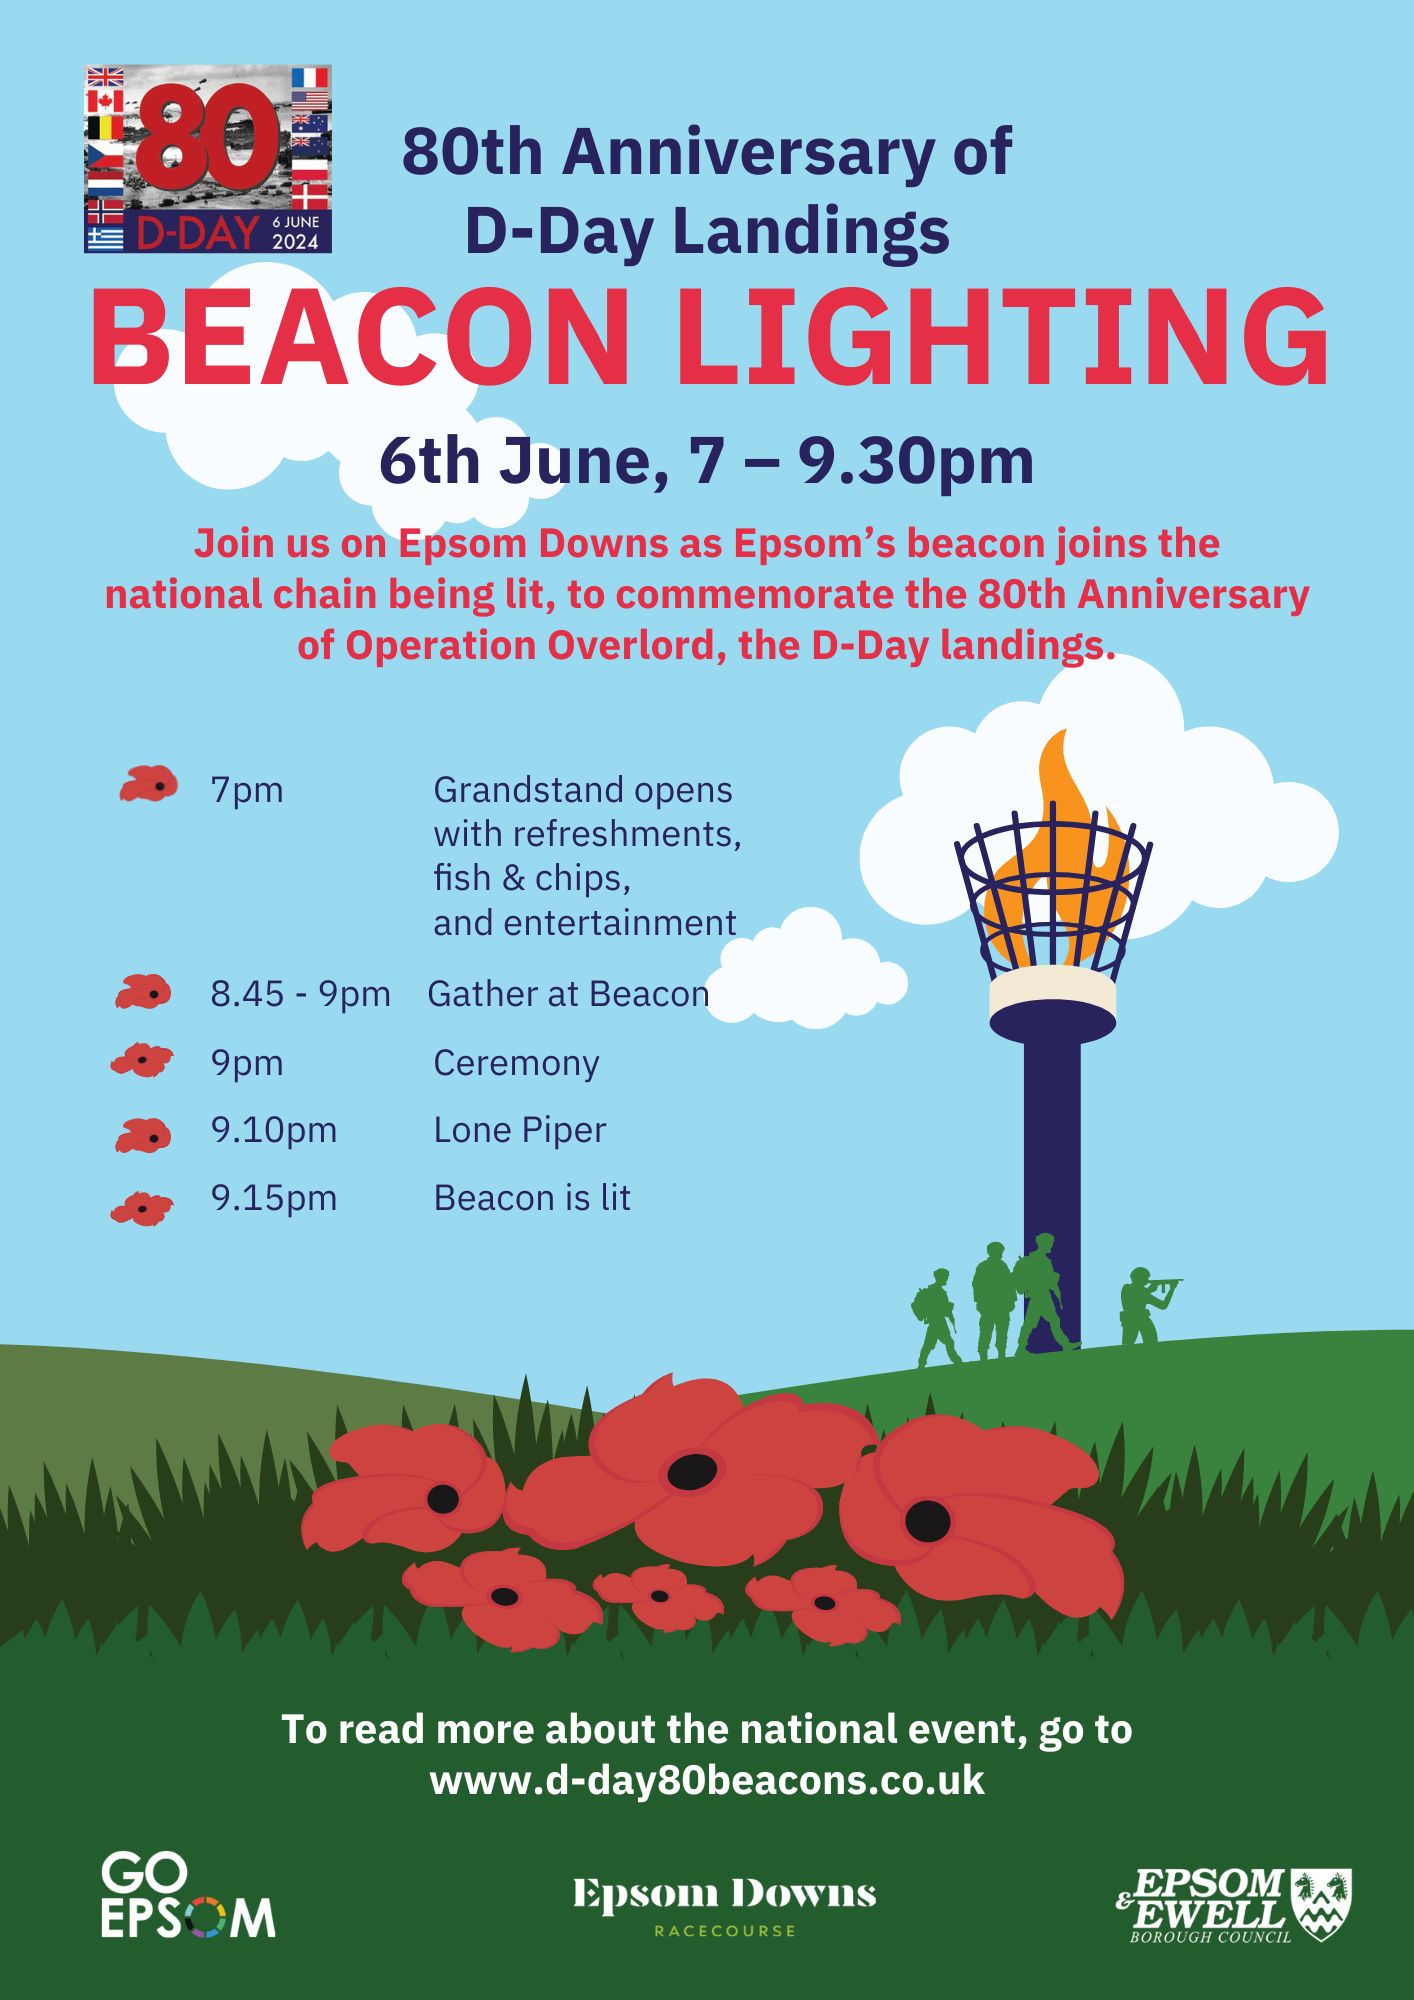 Beacon Lighting. Illustration of a field with poppies and a beacon lit in the background. There are army figures in front of the beacon. 